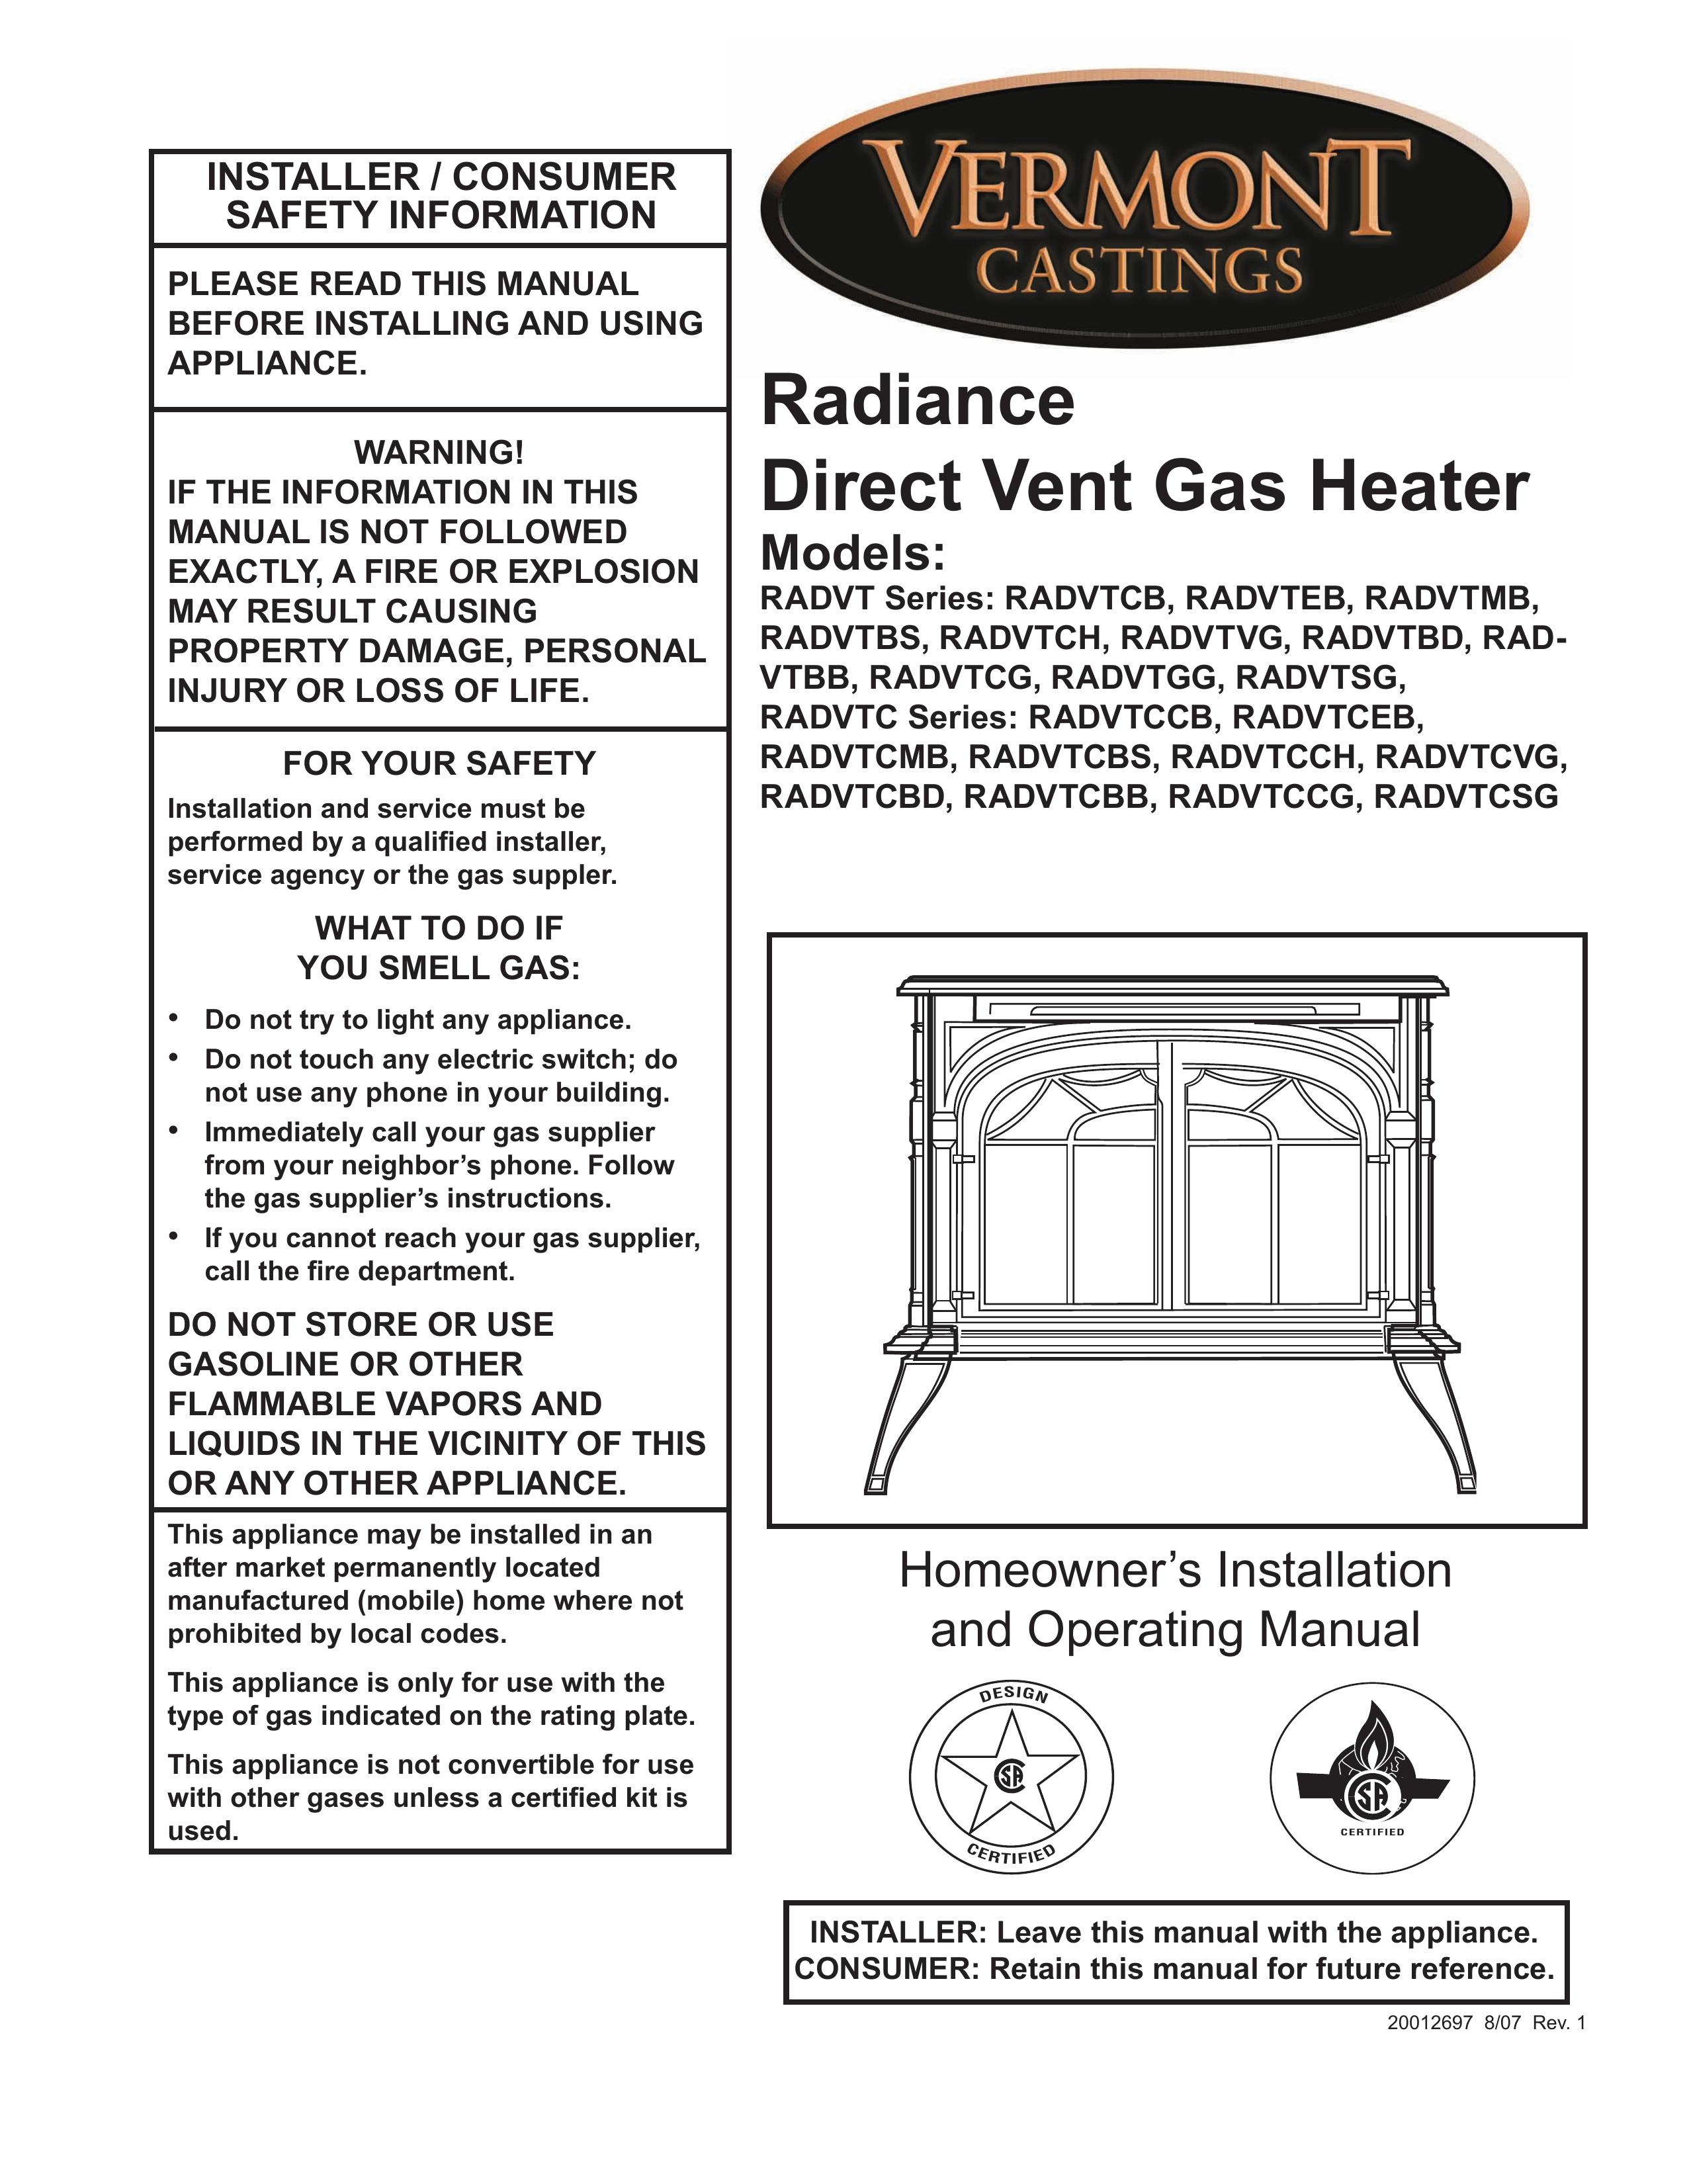 Vermont Casting RADVTCG Outdoor Fireplace User Manual